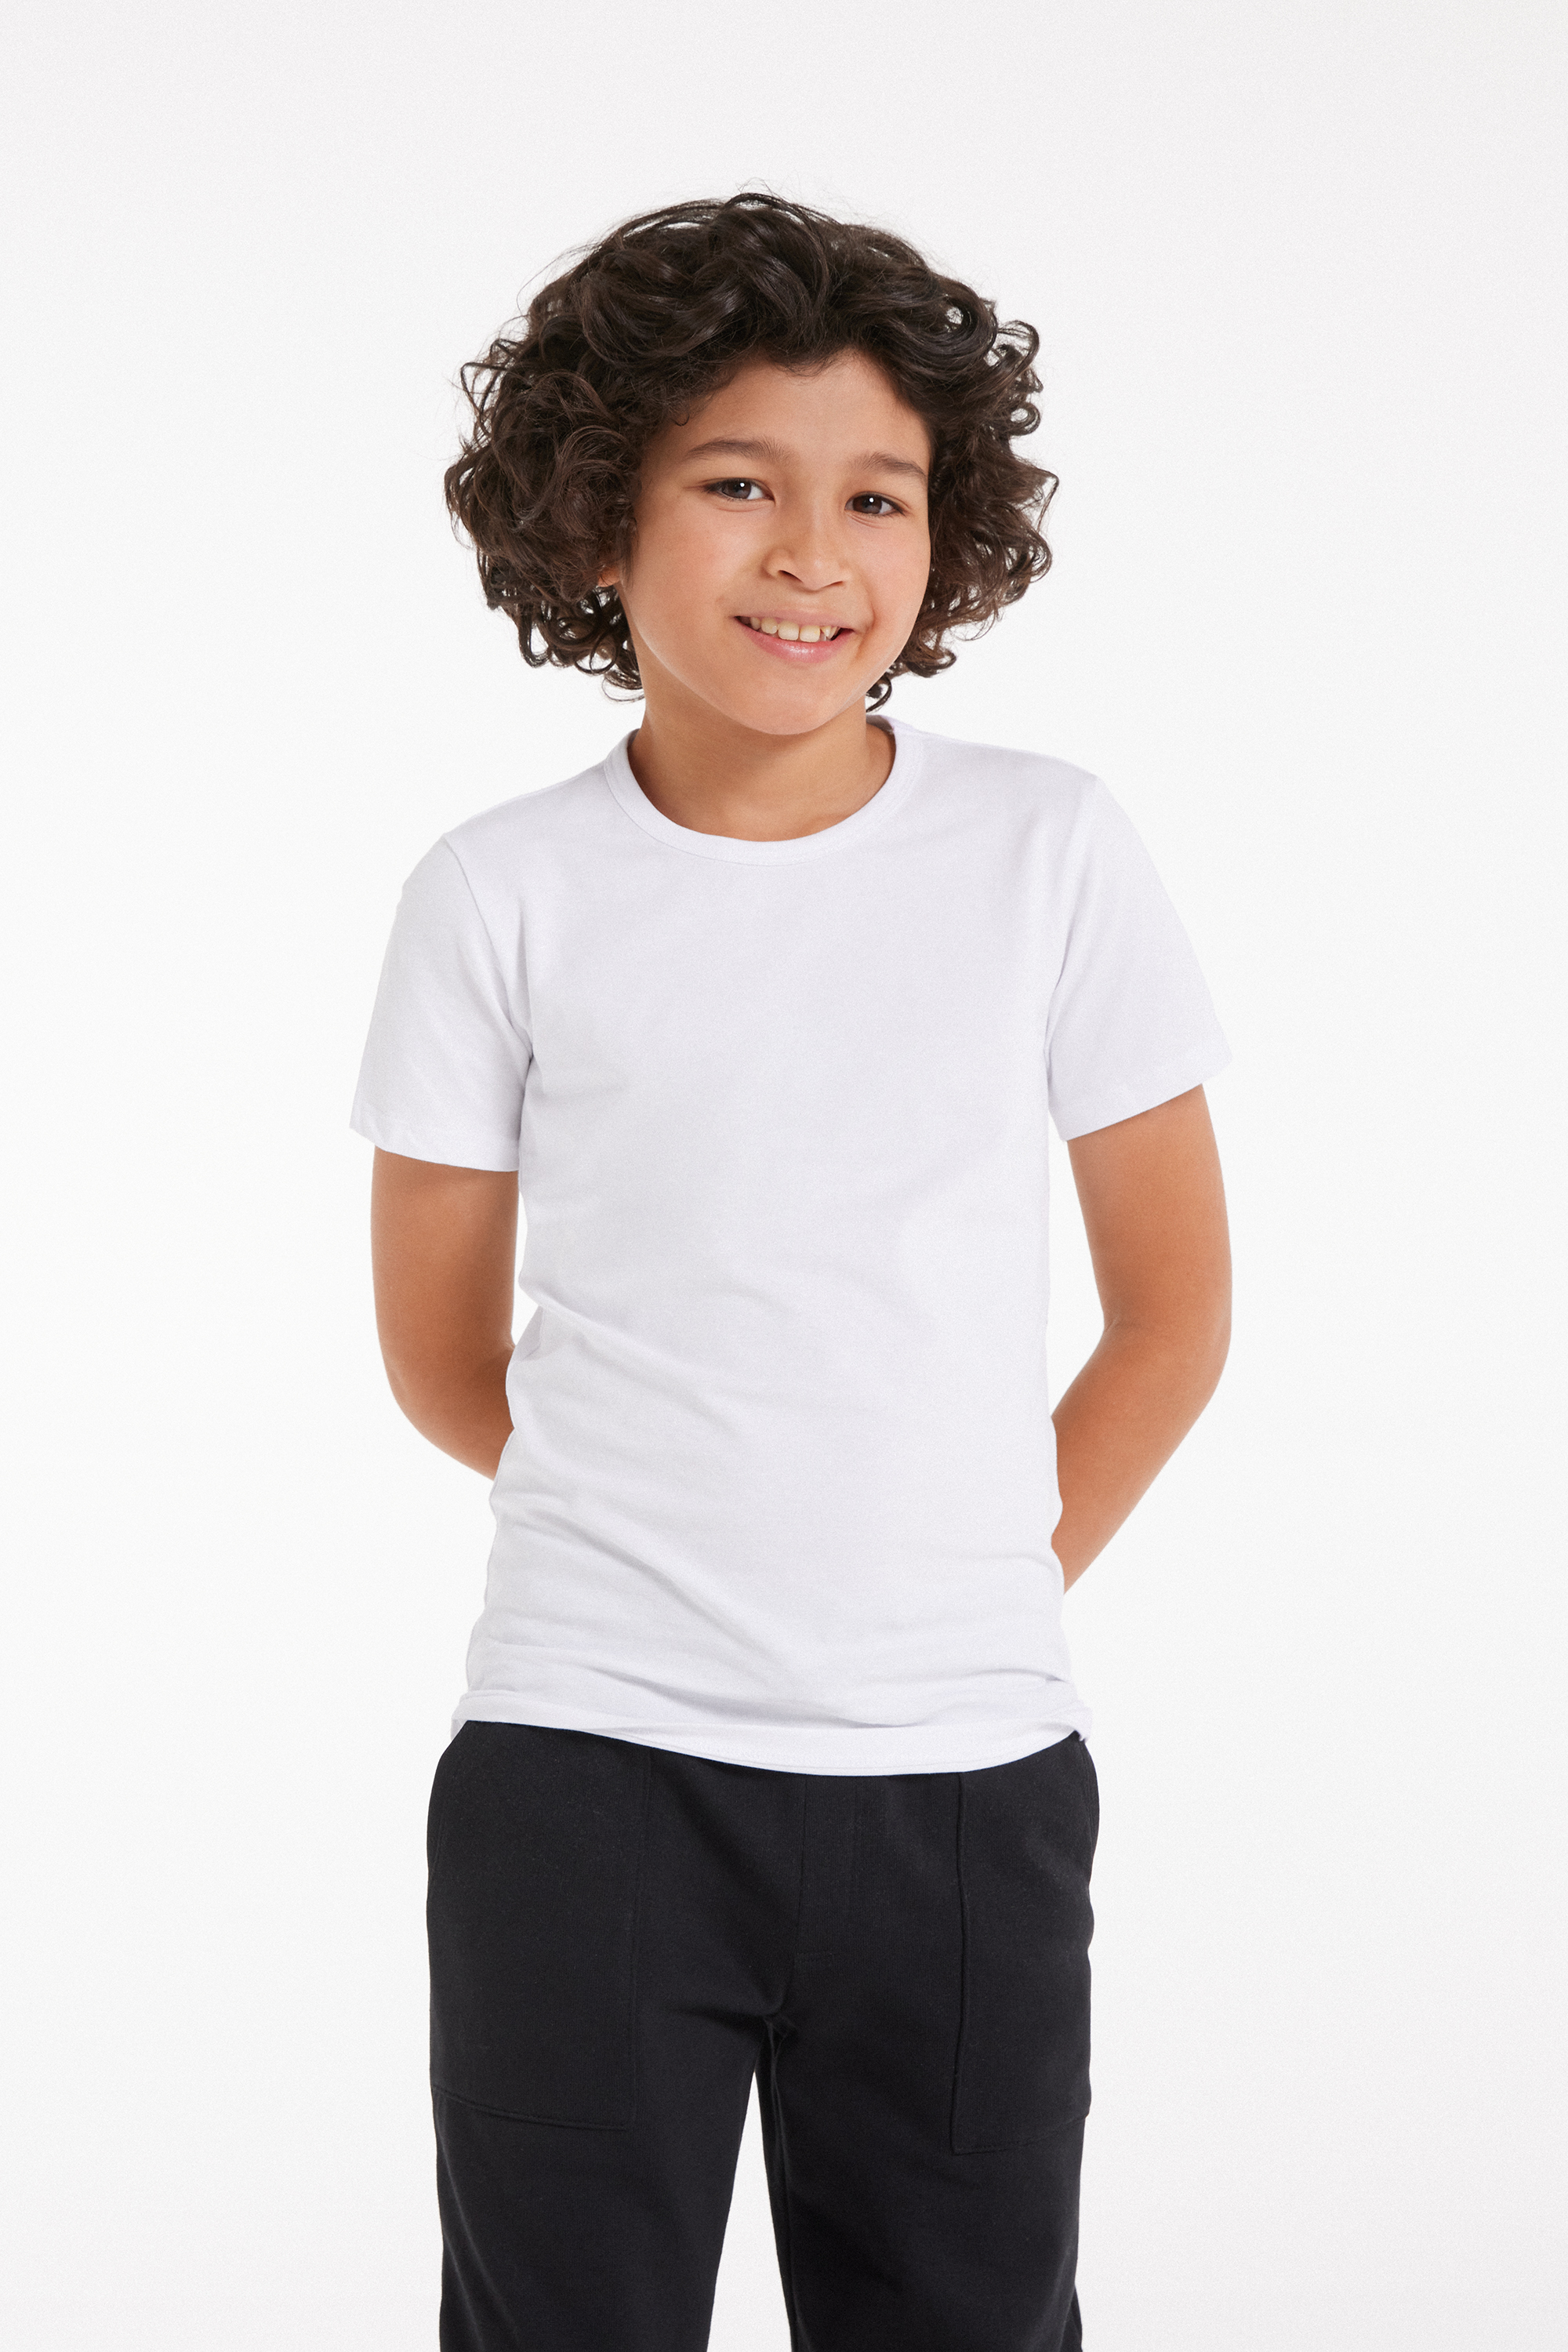 Unisex Kids’ Basic Stretch Cotton T-Shirt with Rounded Neck